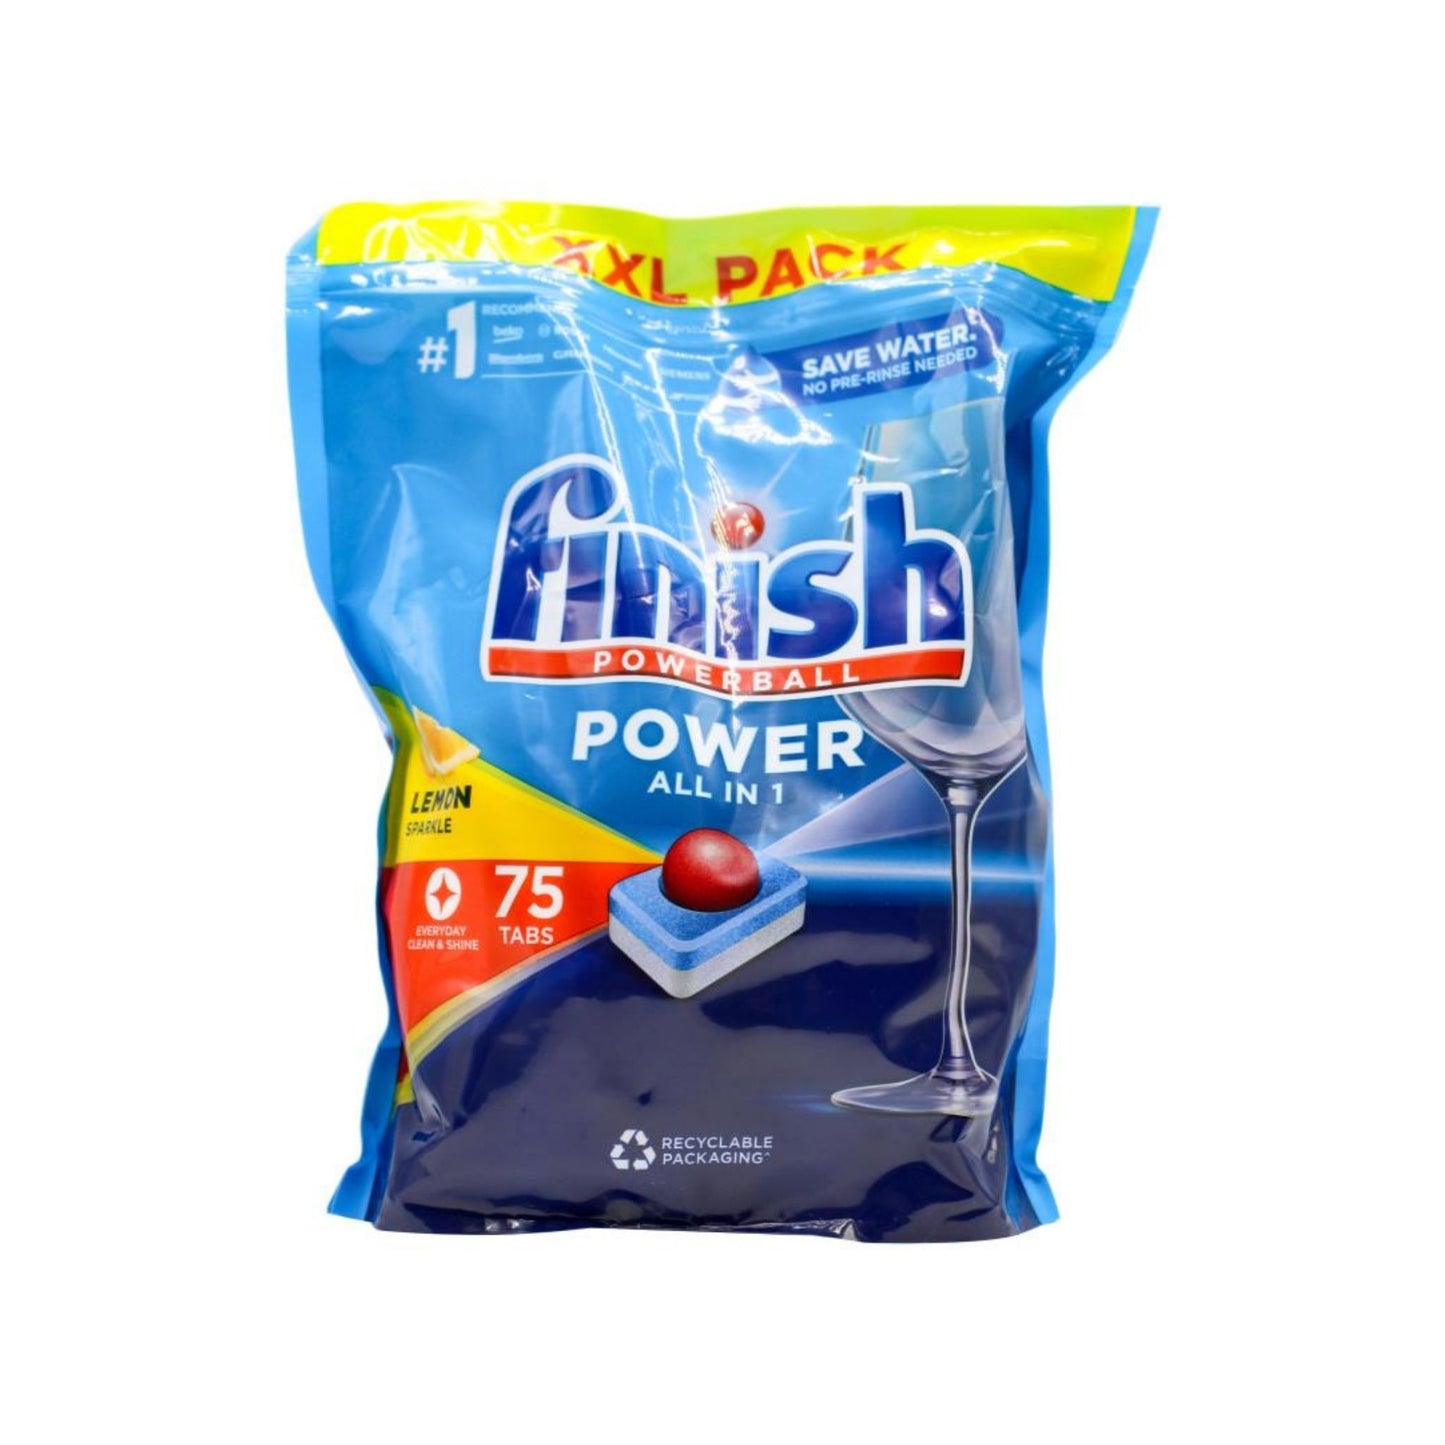 Finish Powerball Dishwashing Tablets Power All In 1 Lemon Sparkle 75 Count x 4 Pack